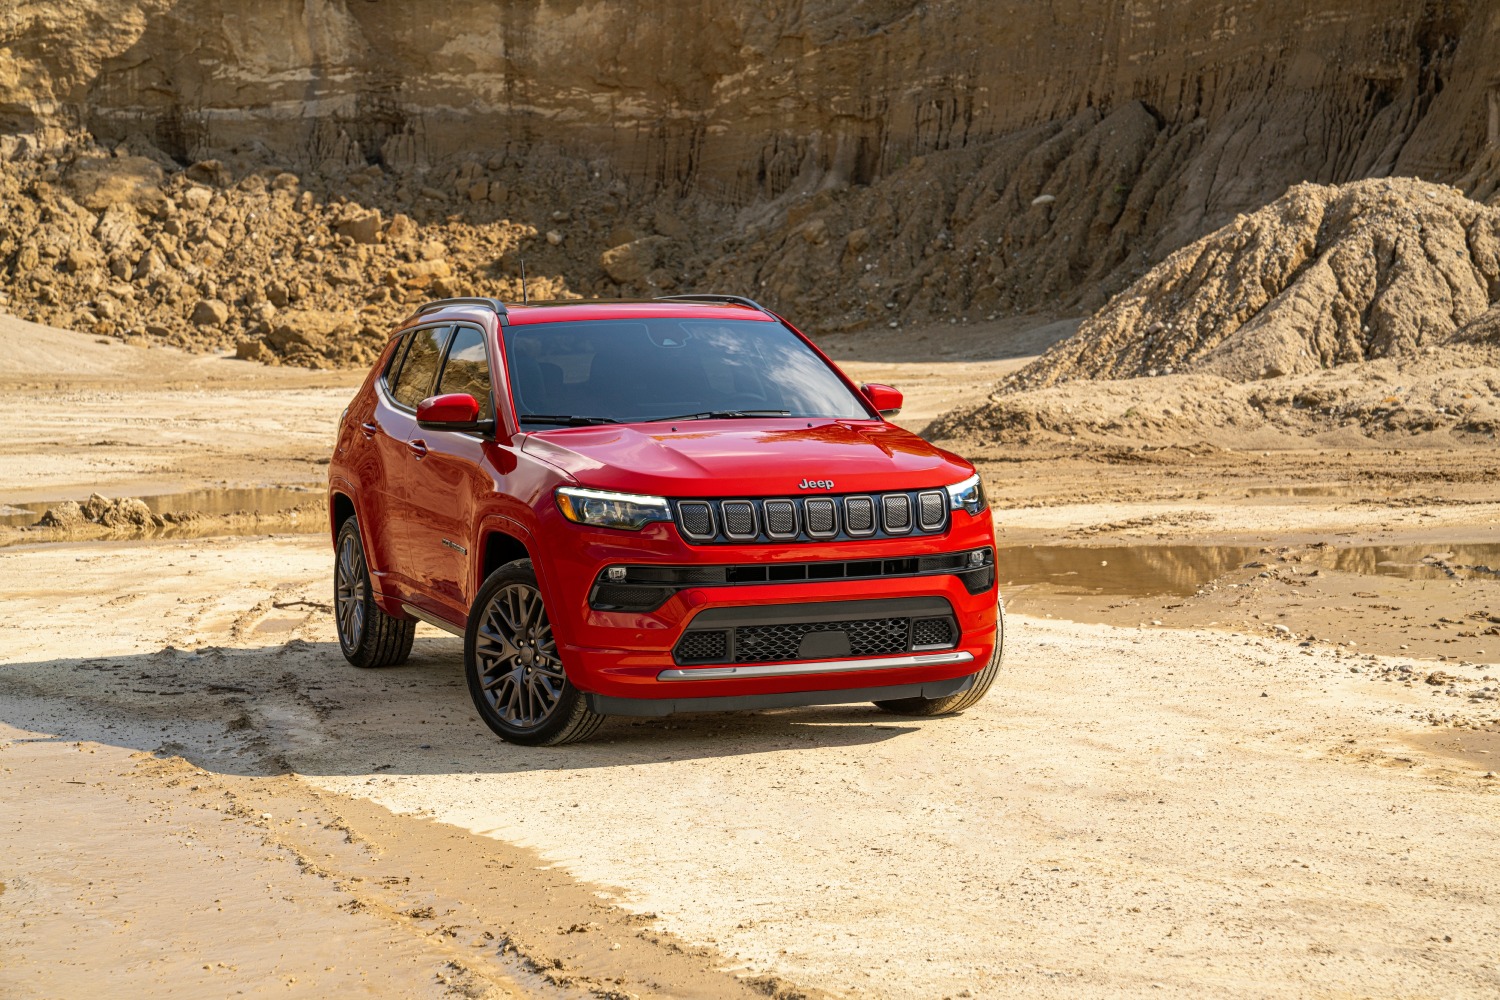 The 2022 Jeep Compass is an IIHS Top Safety Pick